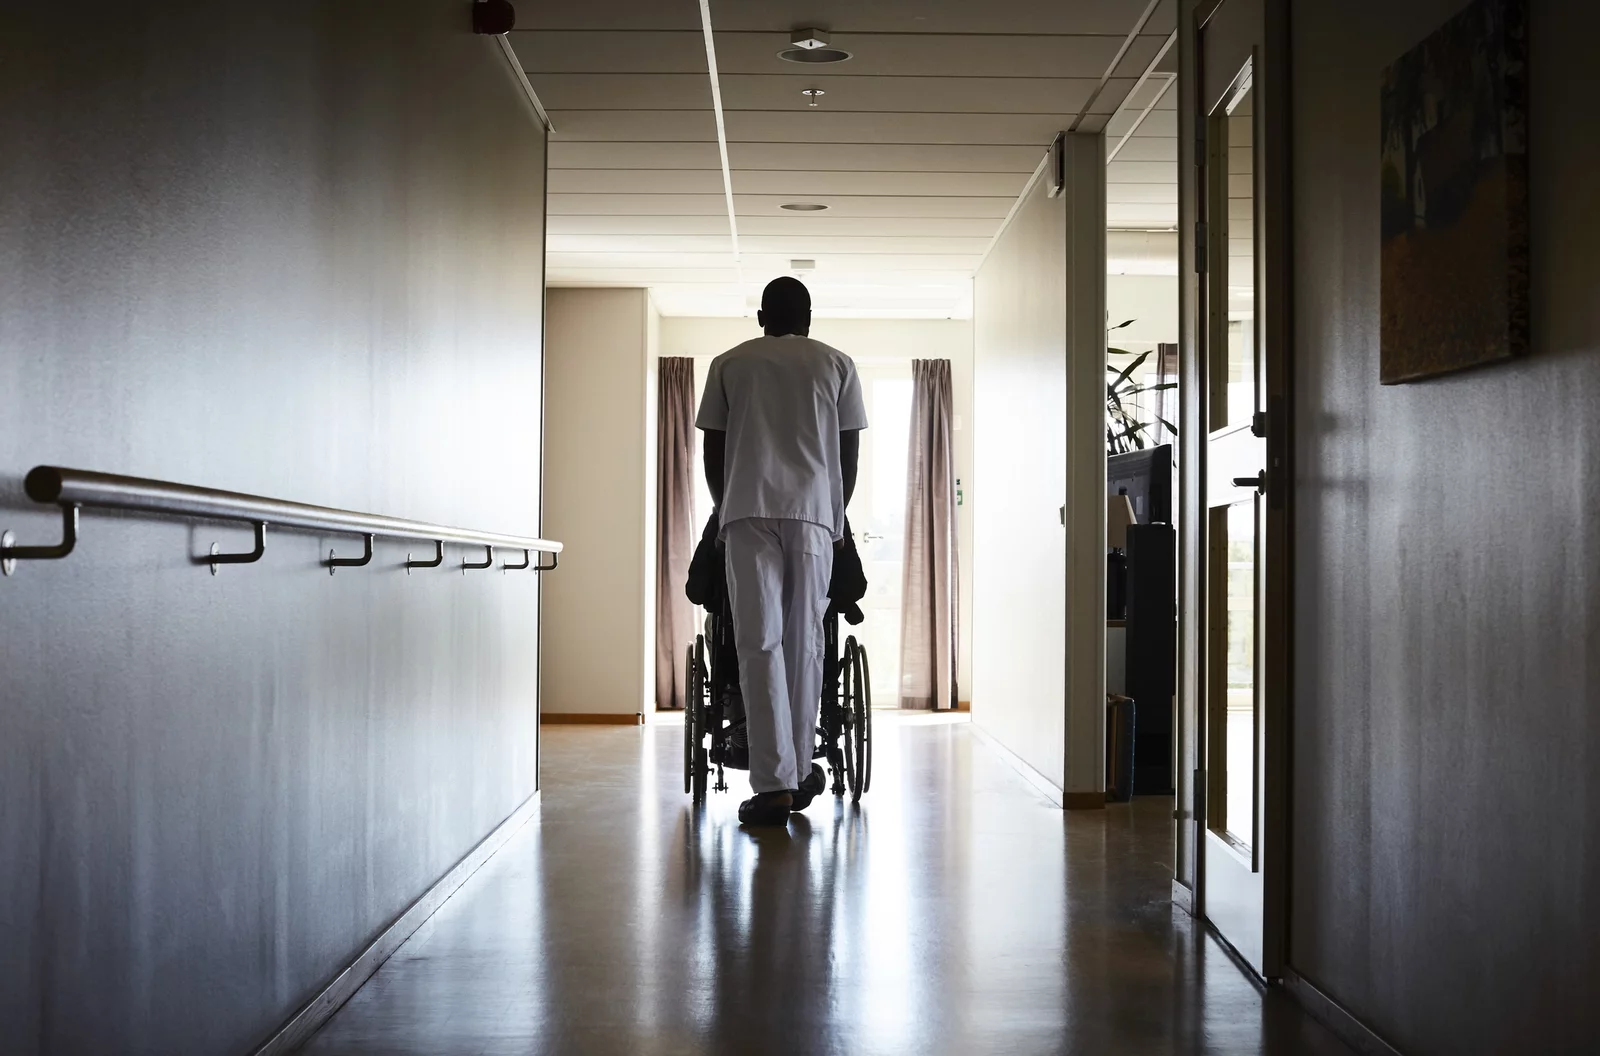 Nursing home owners drained cash while residents deteriorated, state filings suggest